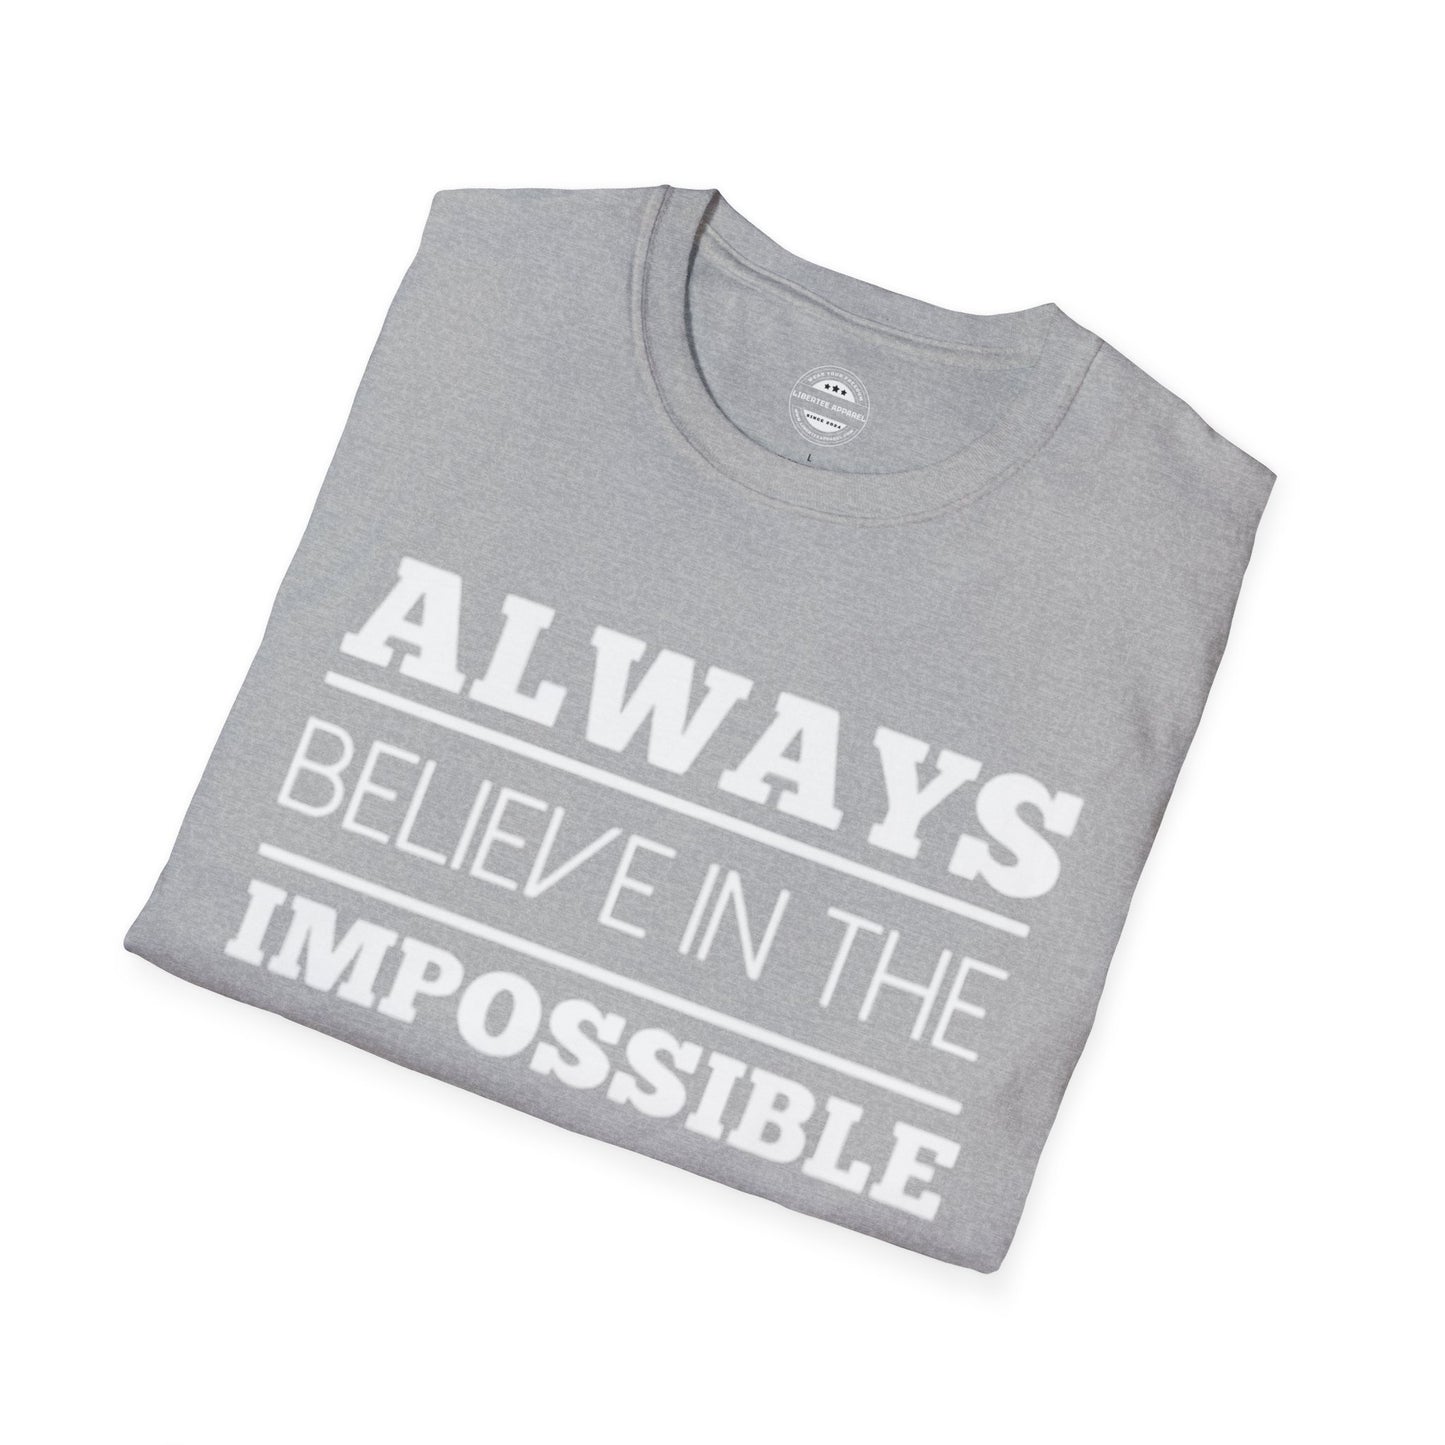 Always Believe In The Impossible Unisex Softstyle T-Shirt